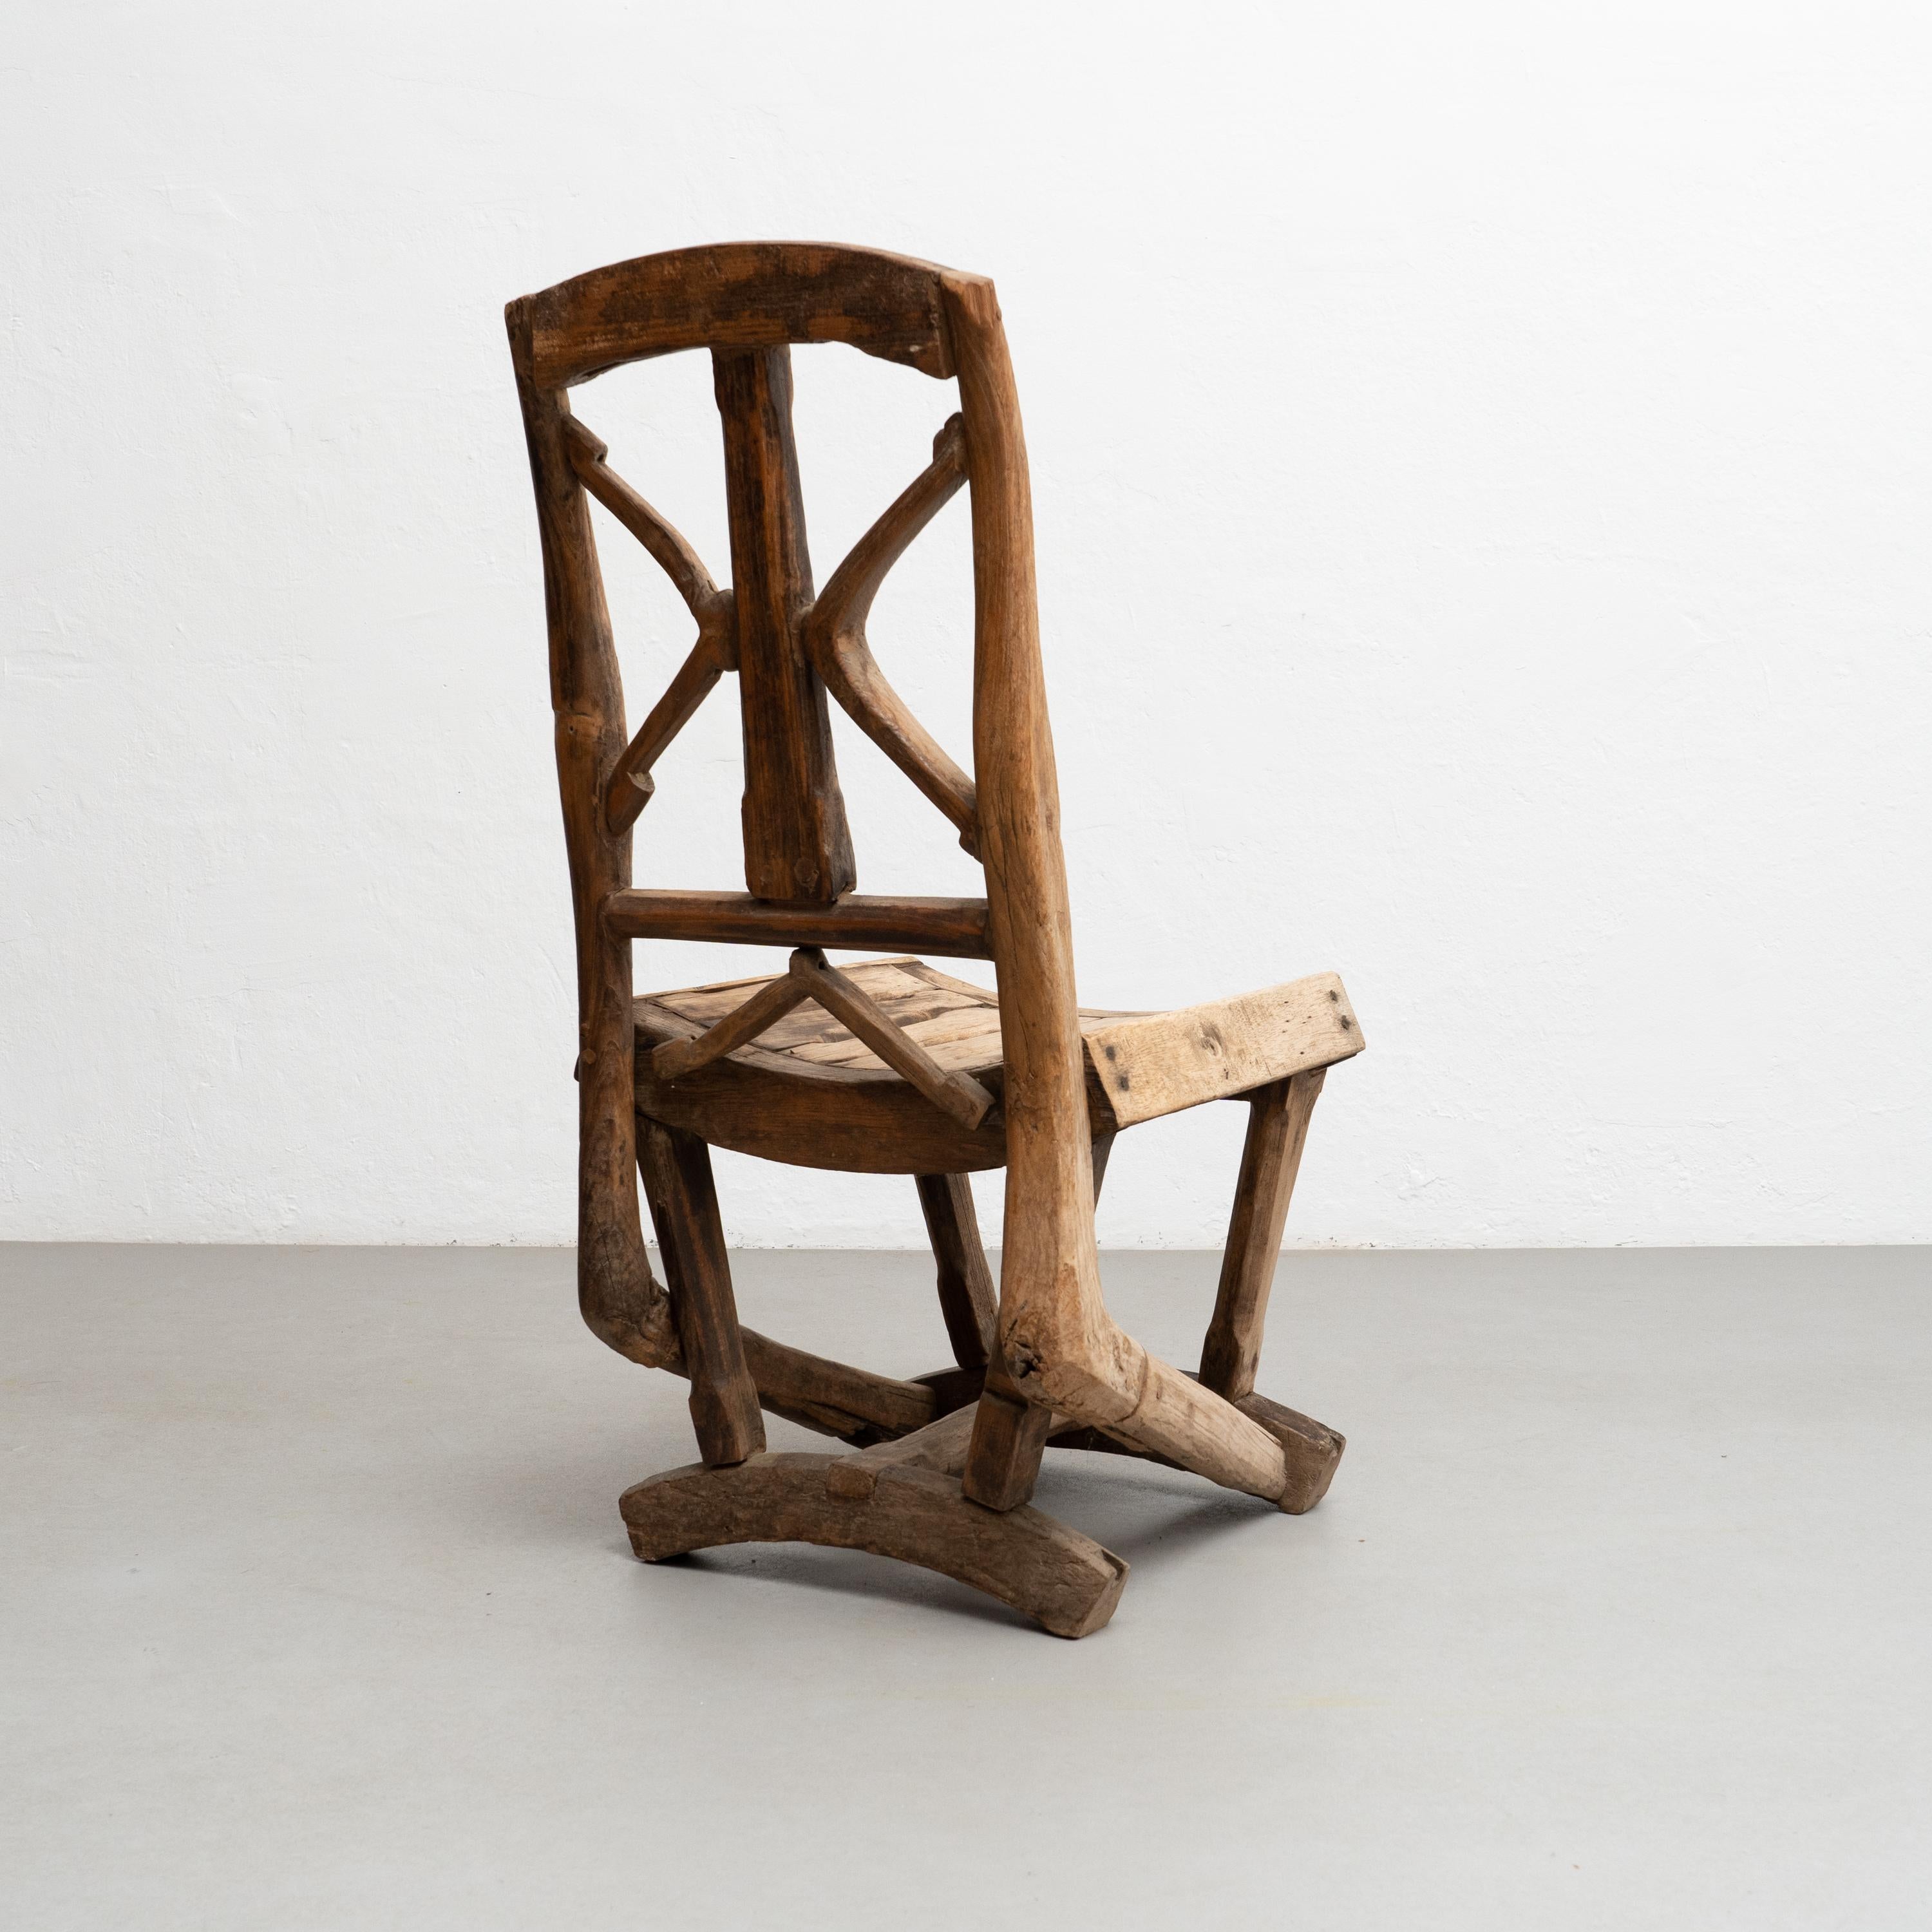 Mid-20th Century Rustic Primitive Hand Made Traditional Wood Chair, circa 1930